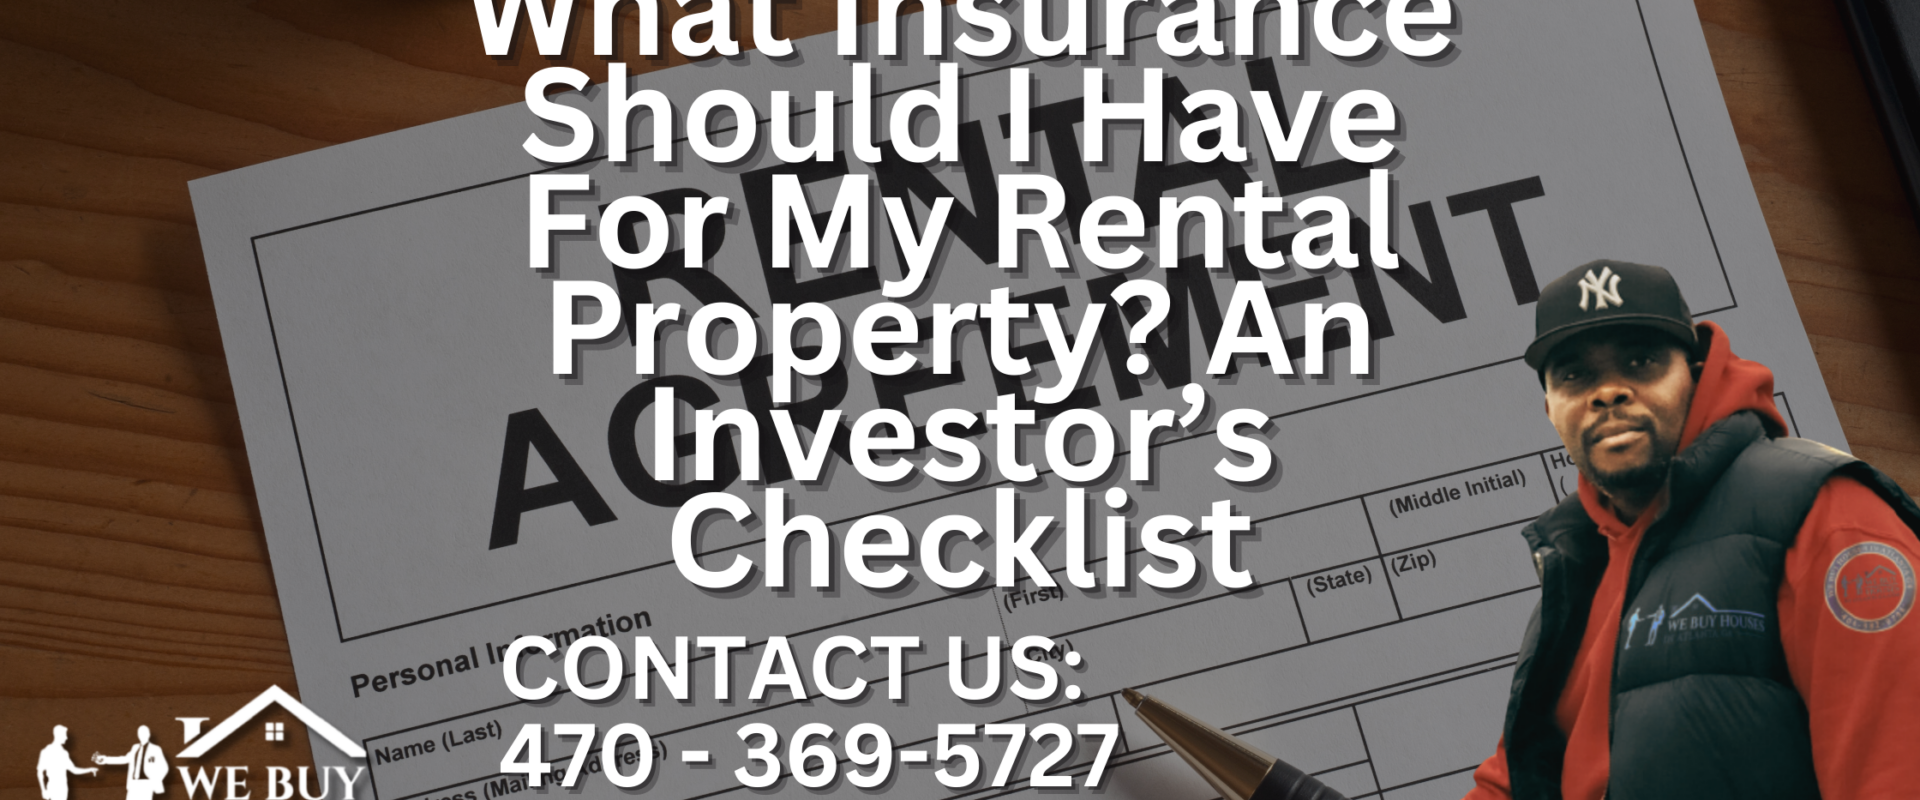 What-Insurance-Should-I-Have-For-My-Rental-Property-An-Investors-Checklist